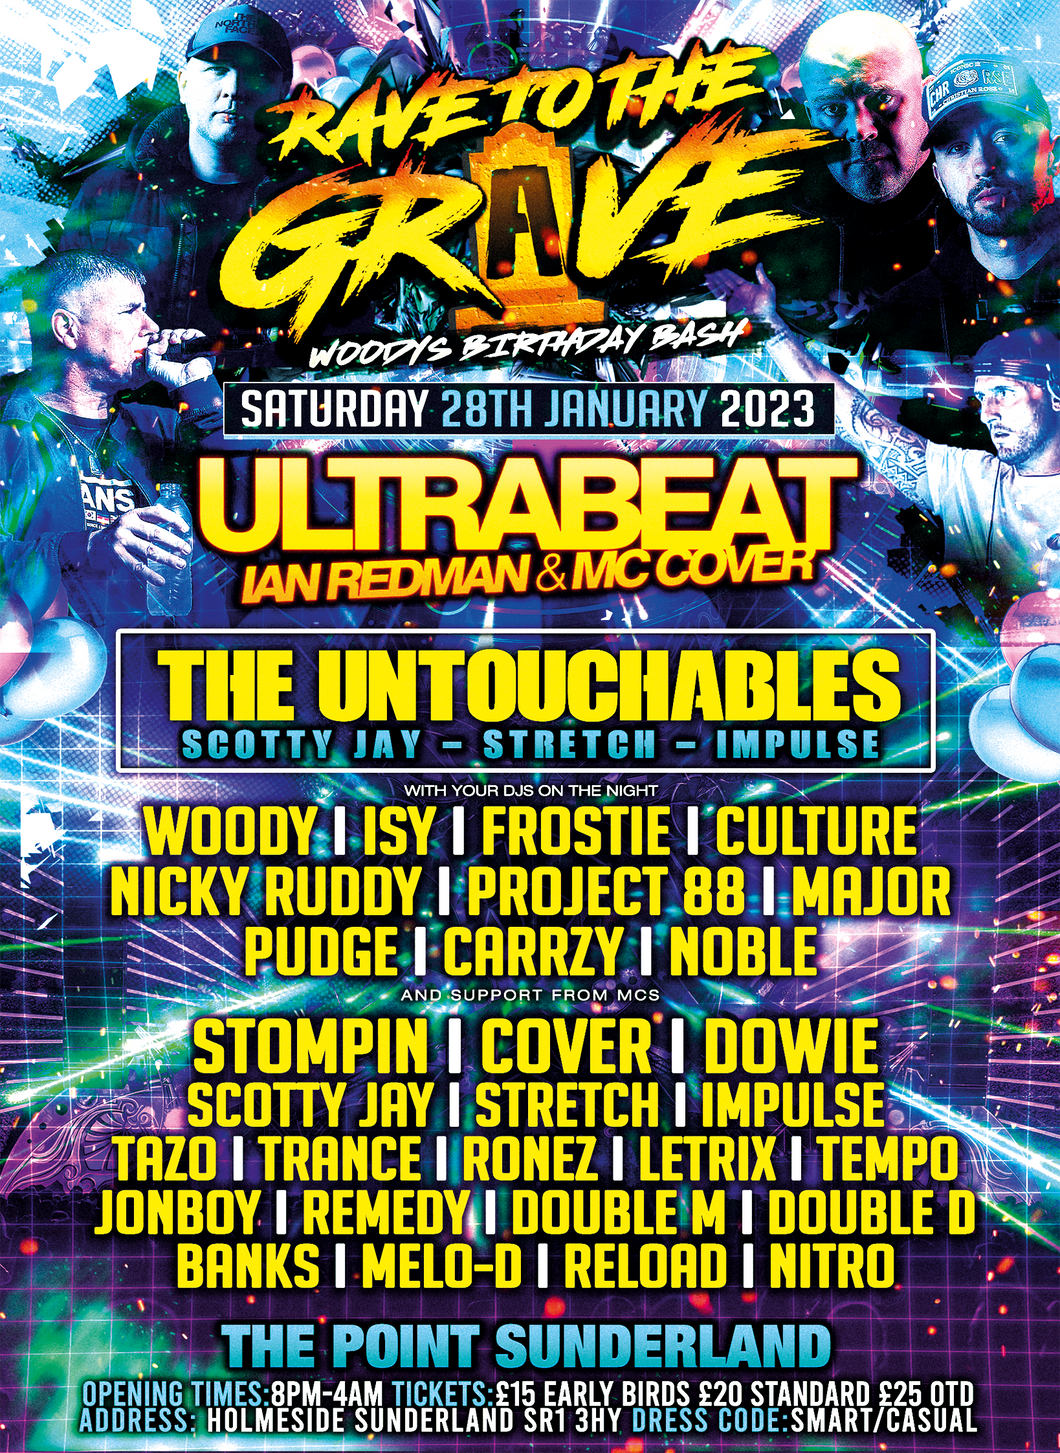 RAVE TO THE GRAVE - 28TH JAN 2023